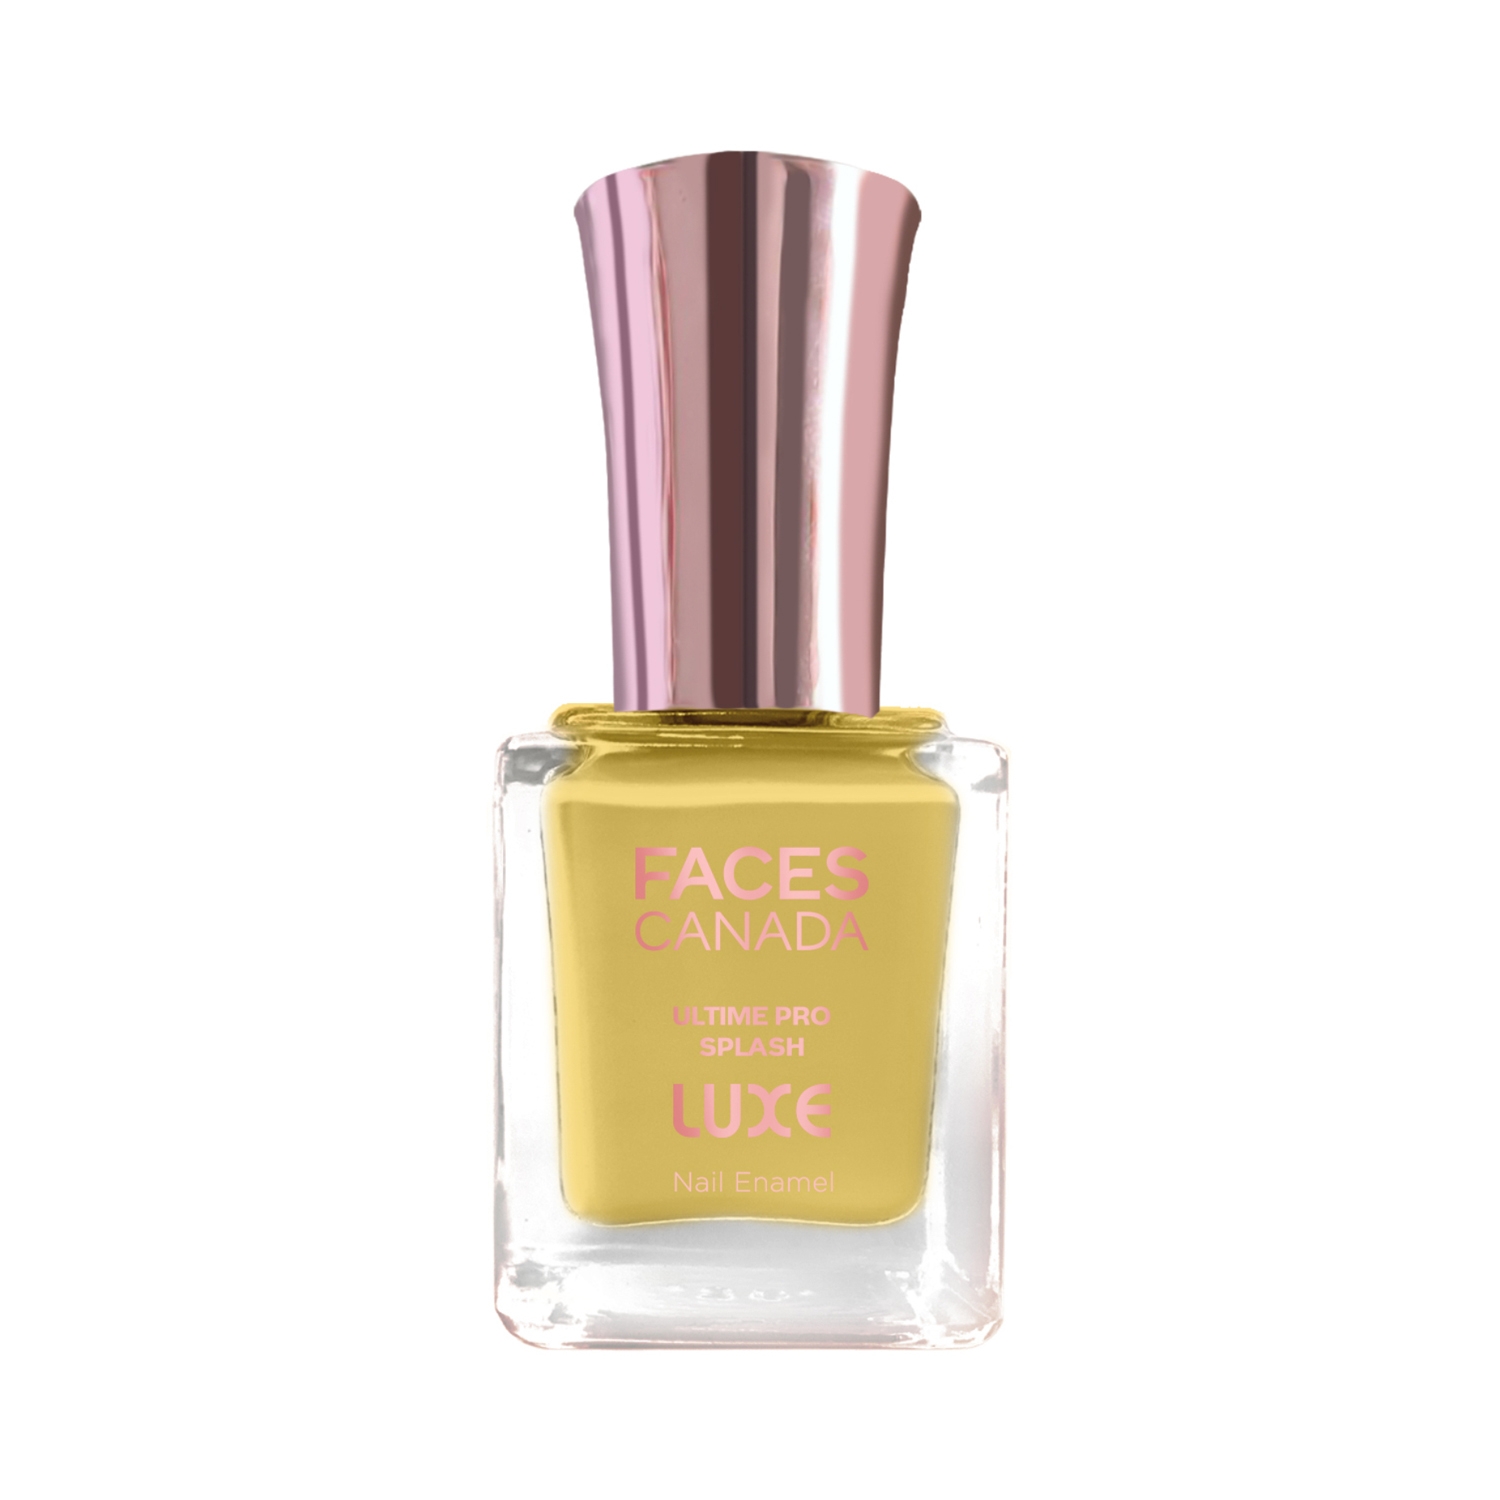 Faces Canada | Faces Canada Ultime Pro Splash Luxe Nail Enamel - L06 Canary (12ml)